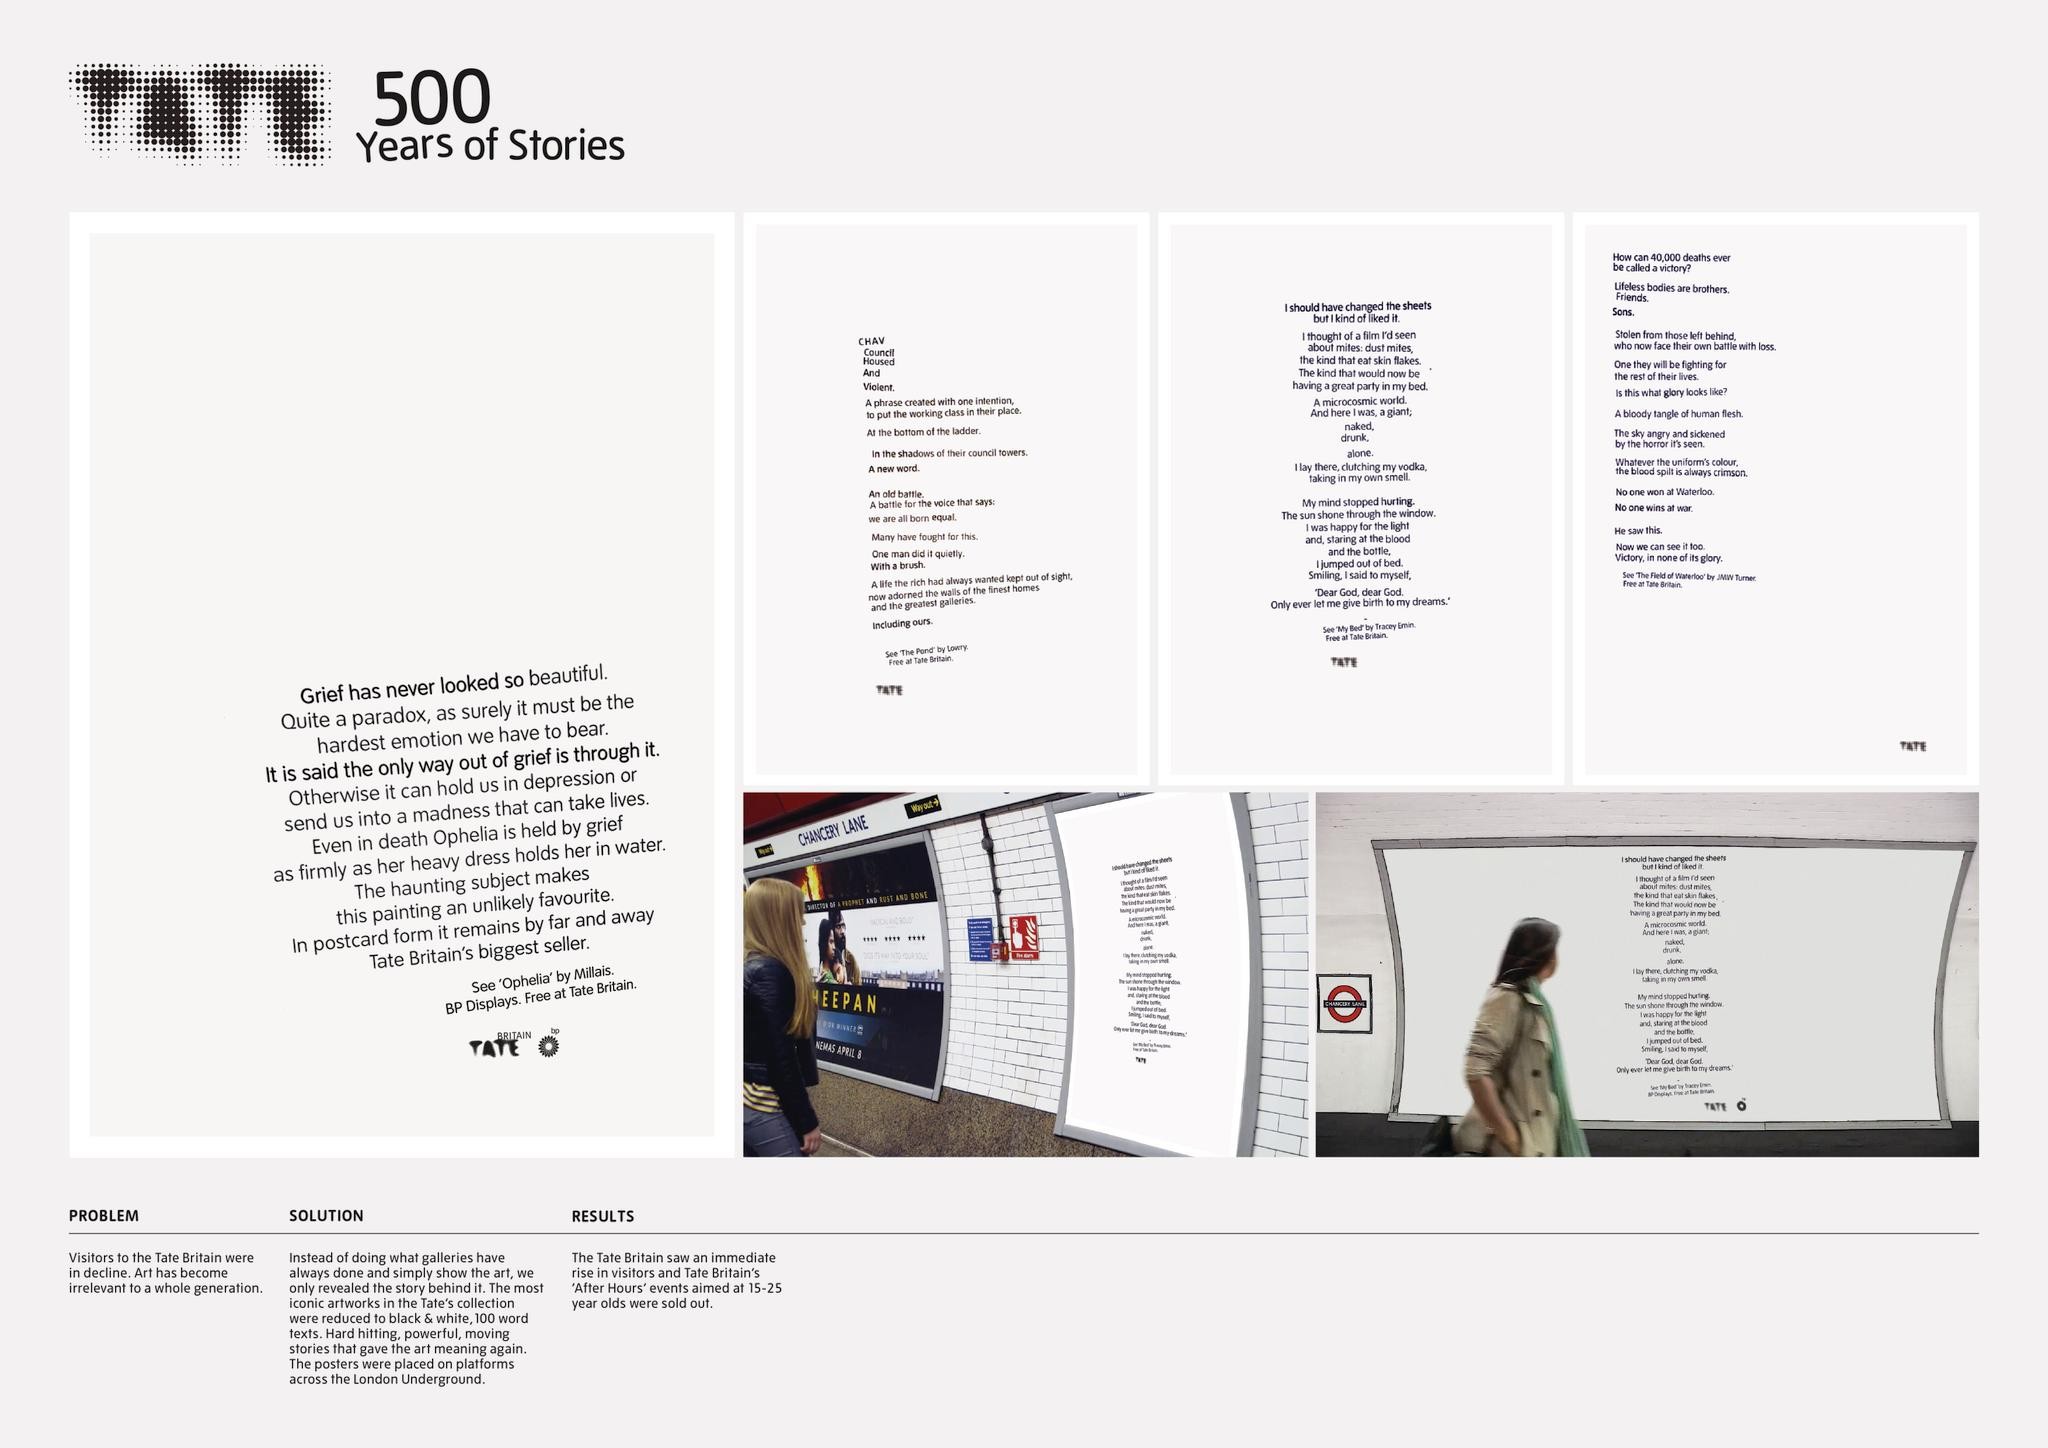 500 YEARS OF STORIES